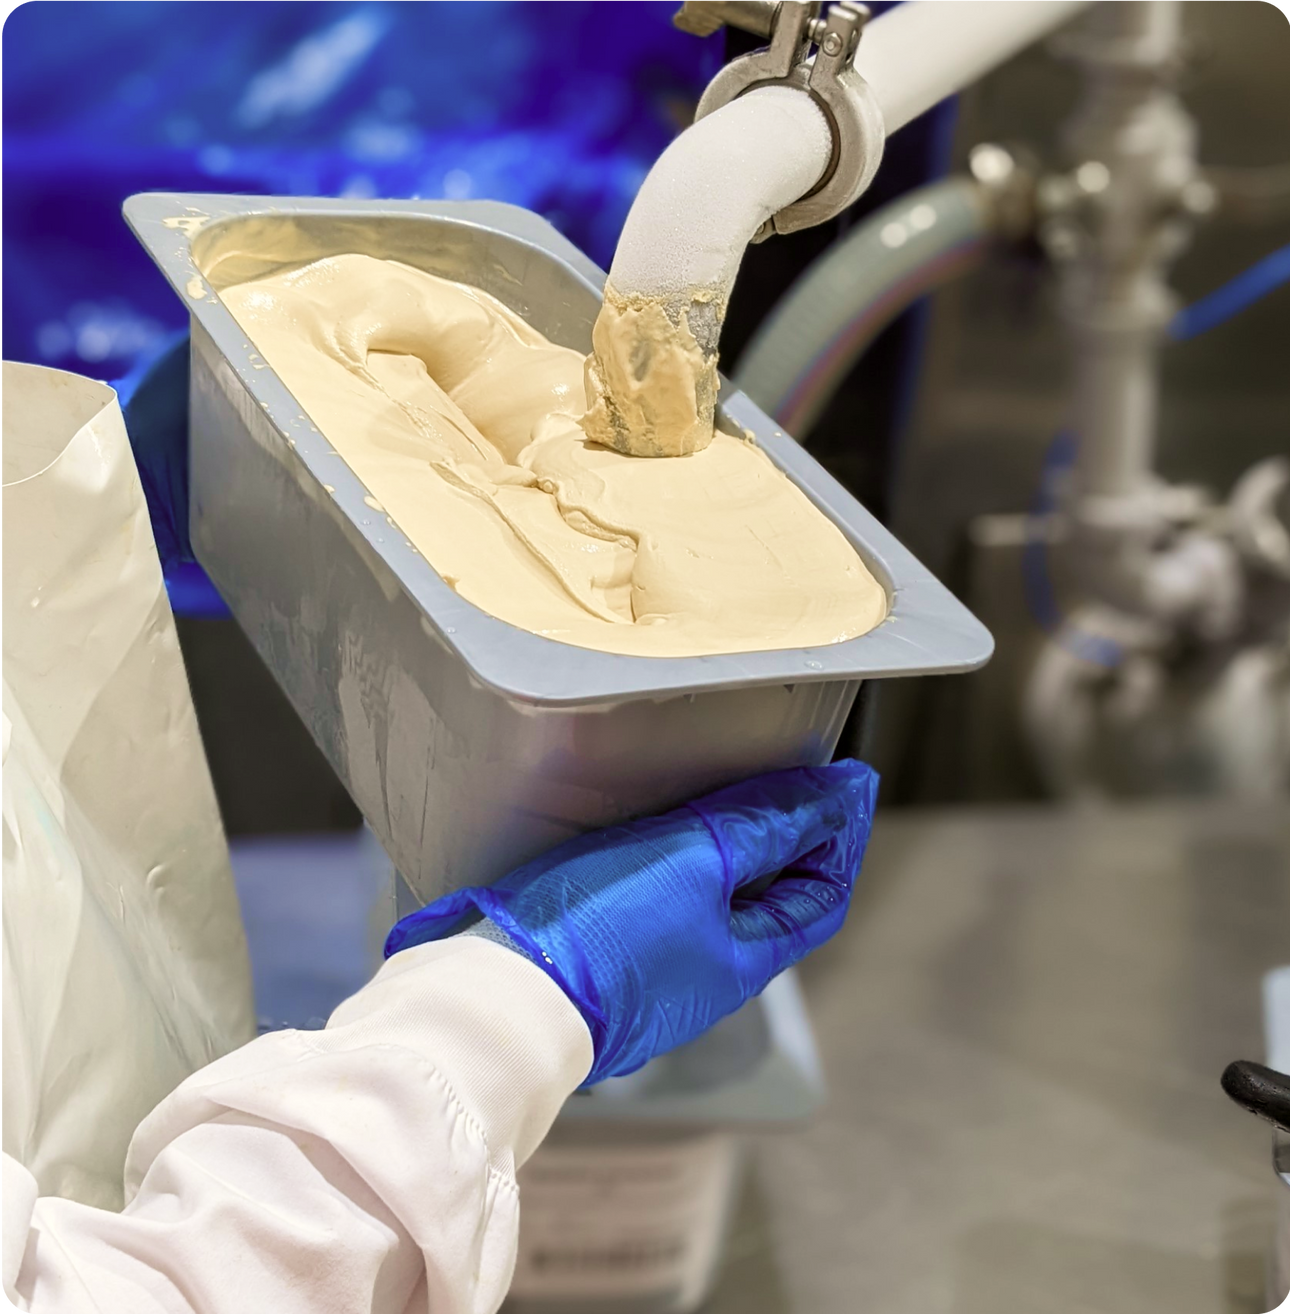 gelato being produced in bulk at a factory by a worker